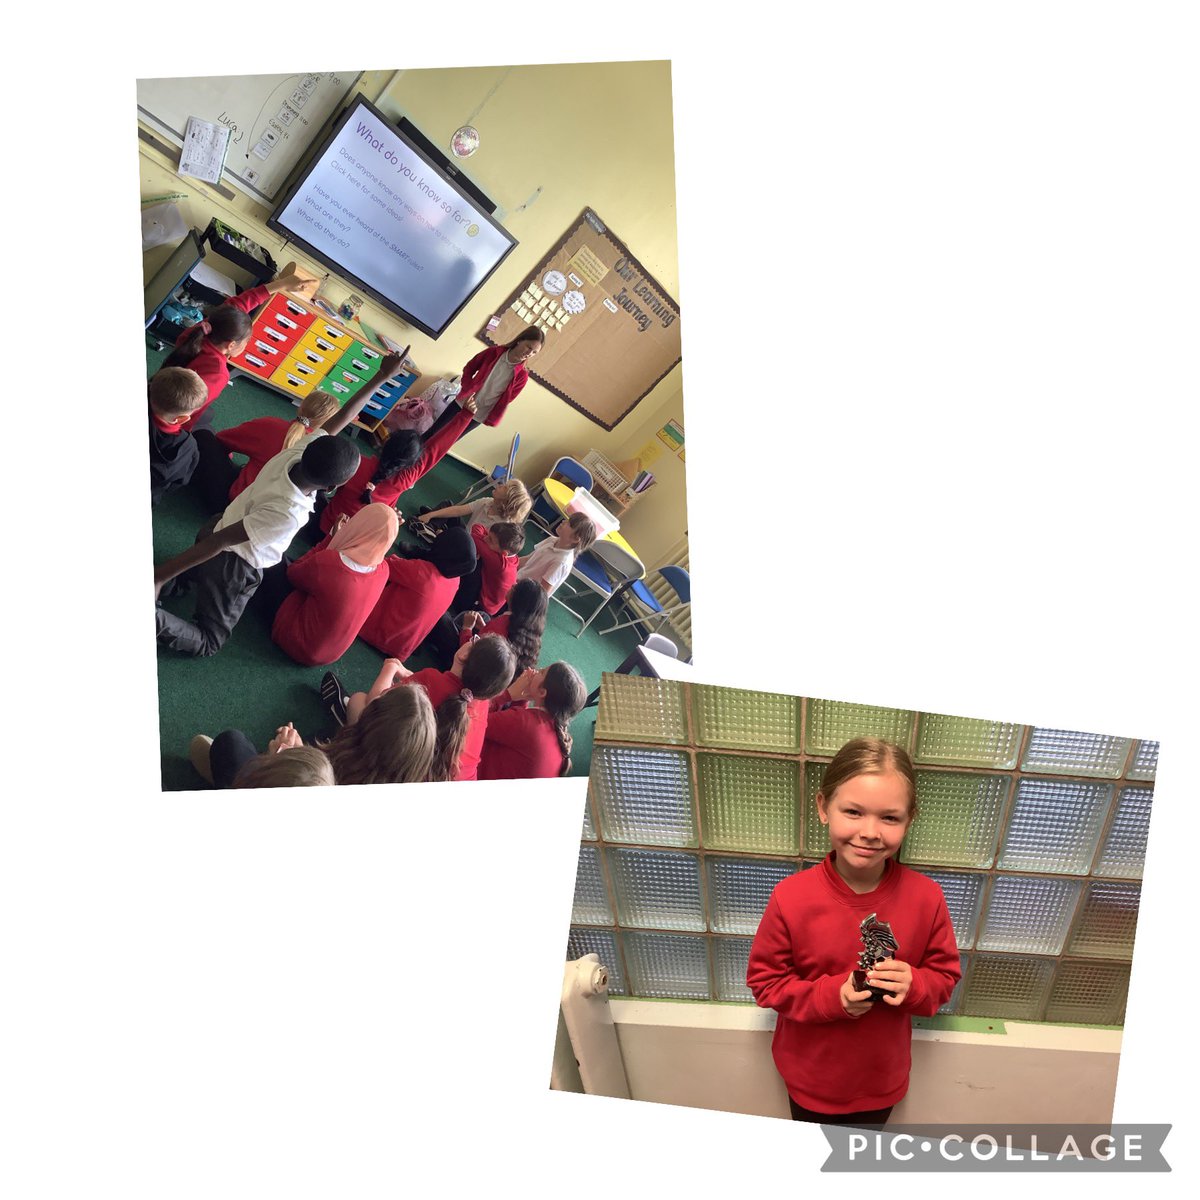 Dosbarth Cedar have had a busy week. We have built propagators, planted sunflower seeds, had an e-safety lesson with a digital leader and celebrated J’s football achievements! Have a lovely half term 🤩☀️